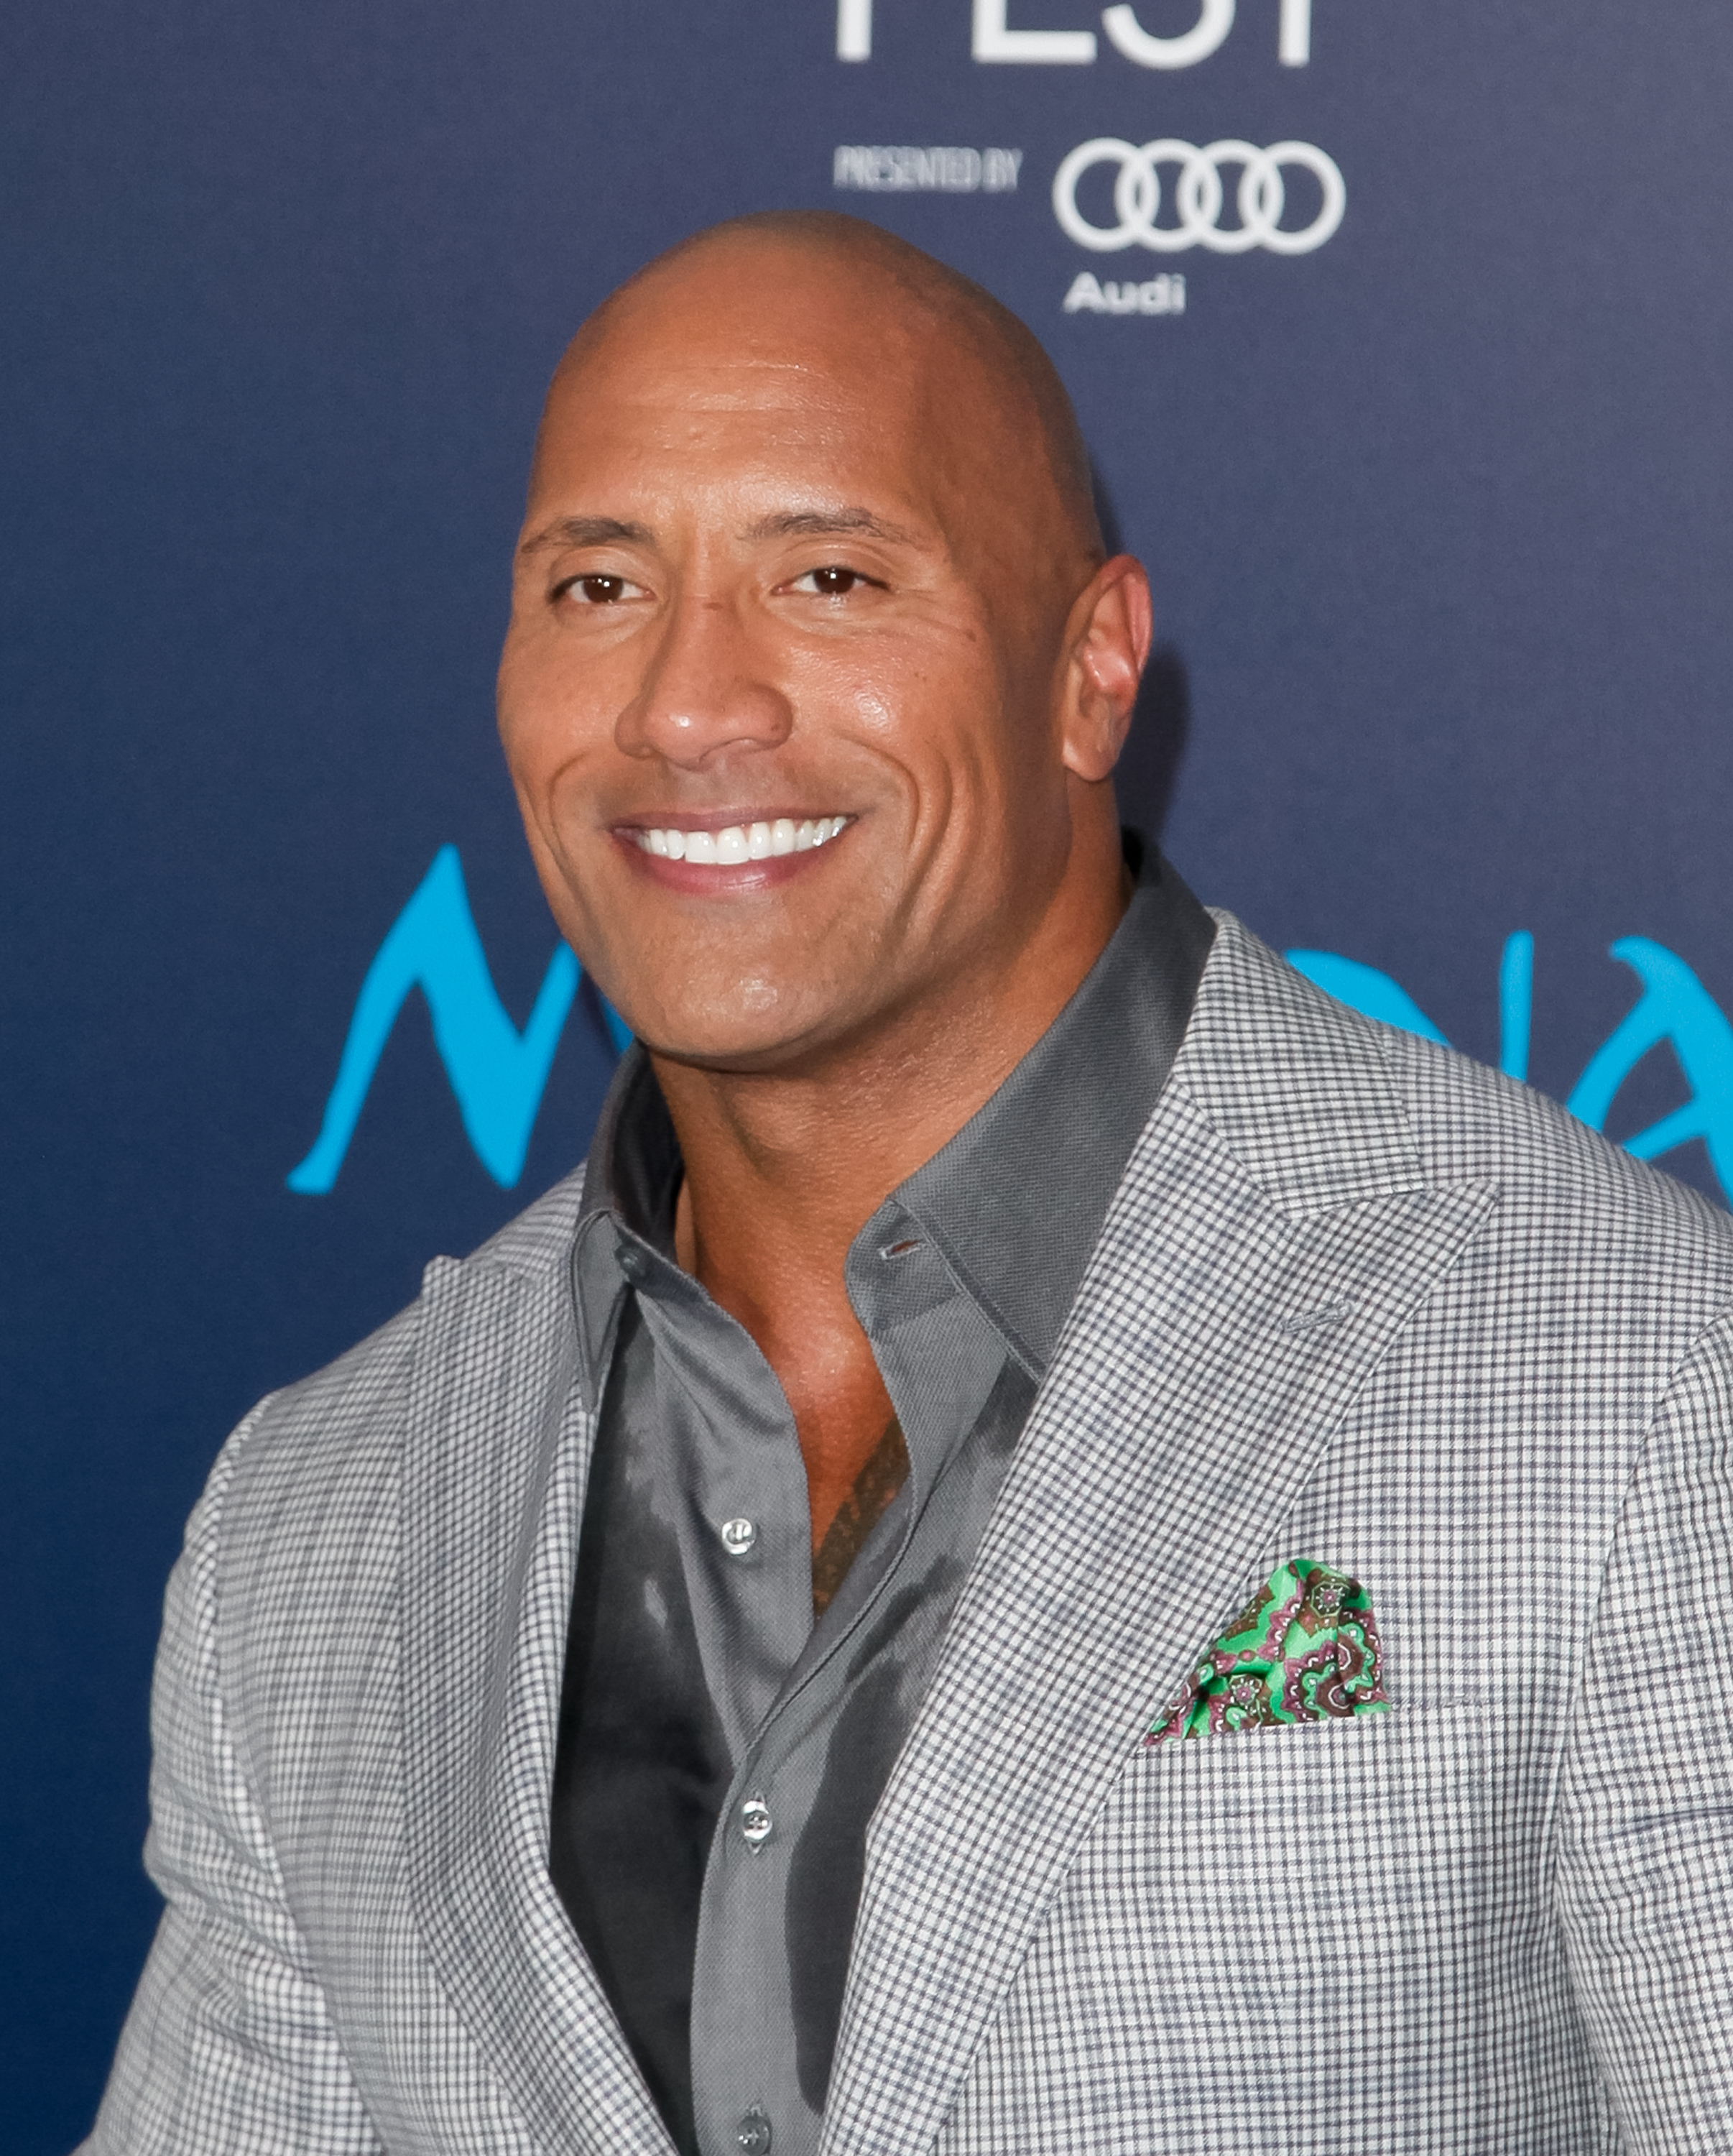 Close-up of Dwayne smiling in a shirt and jacket at a media event